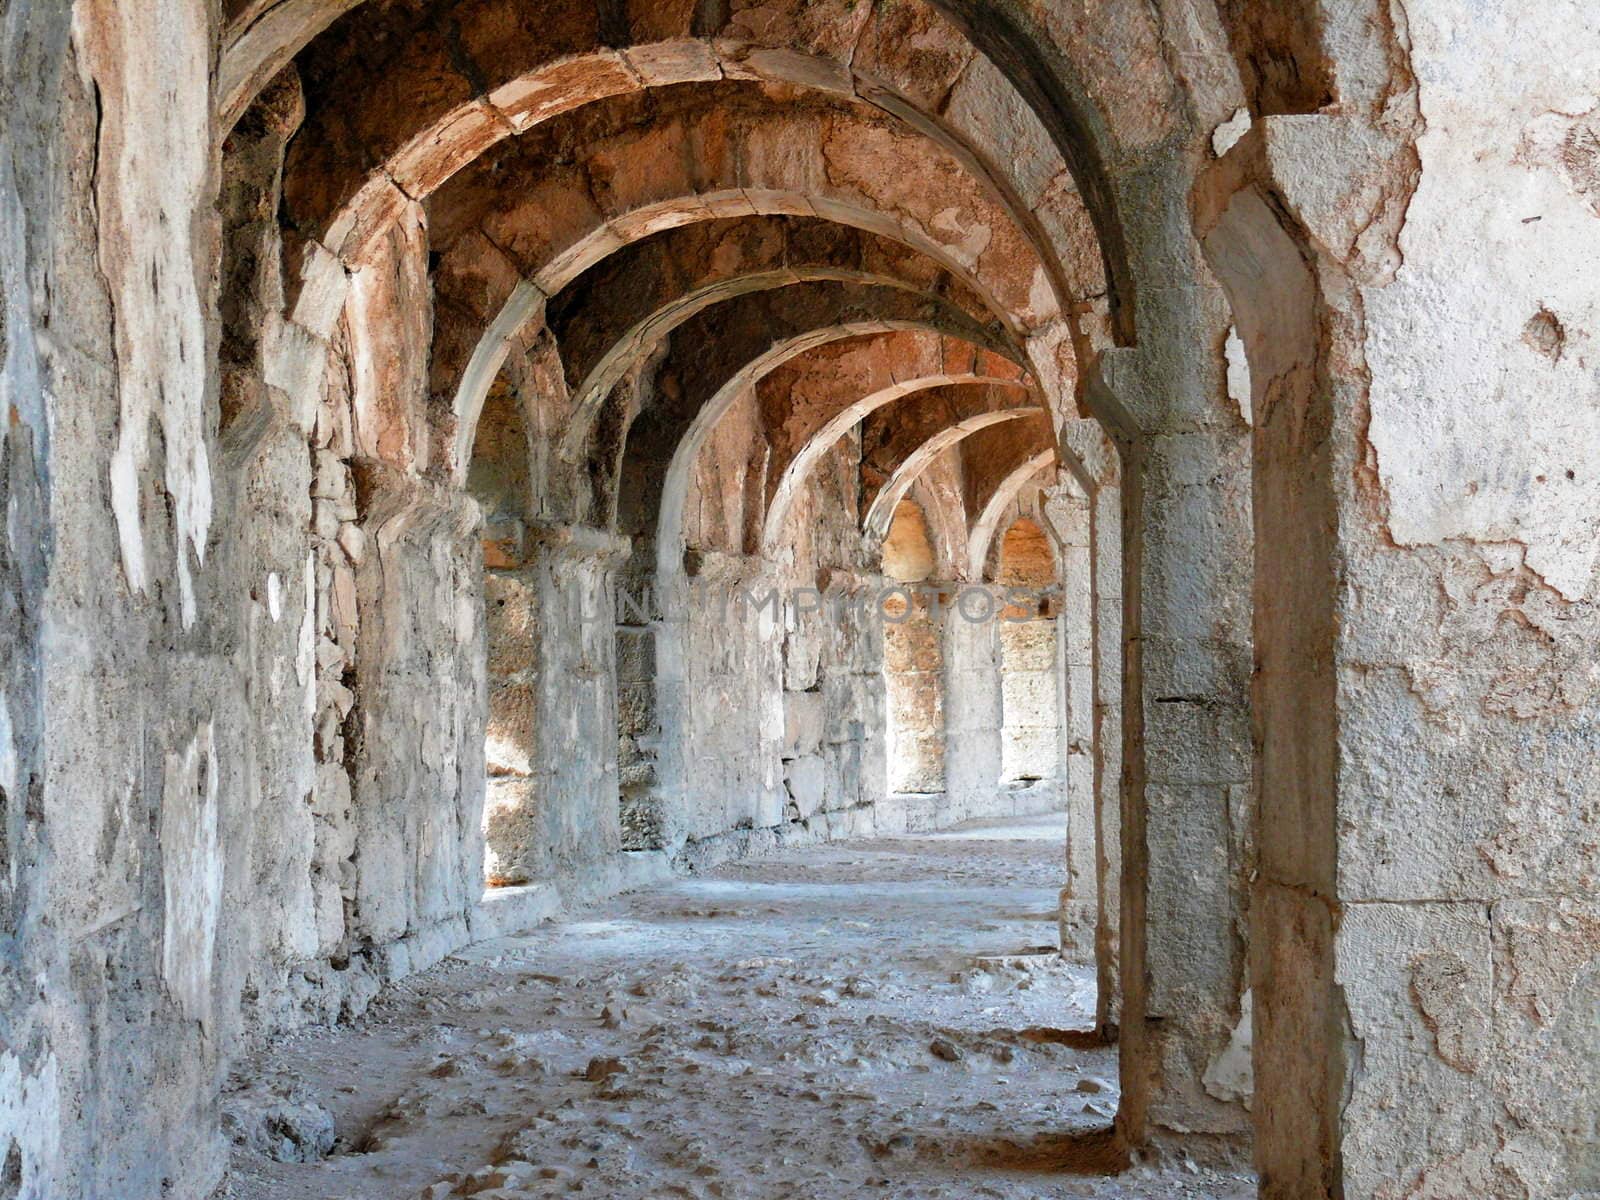 Arch gallery in ancient amphitheater - Aspendos, Turkey